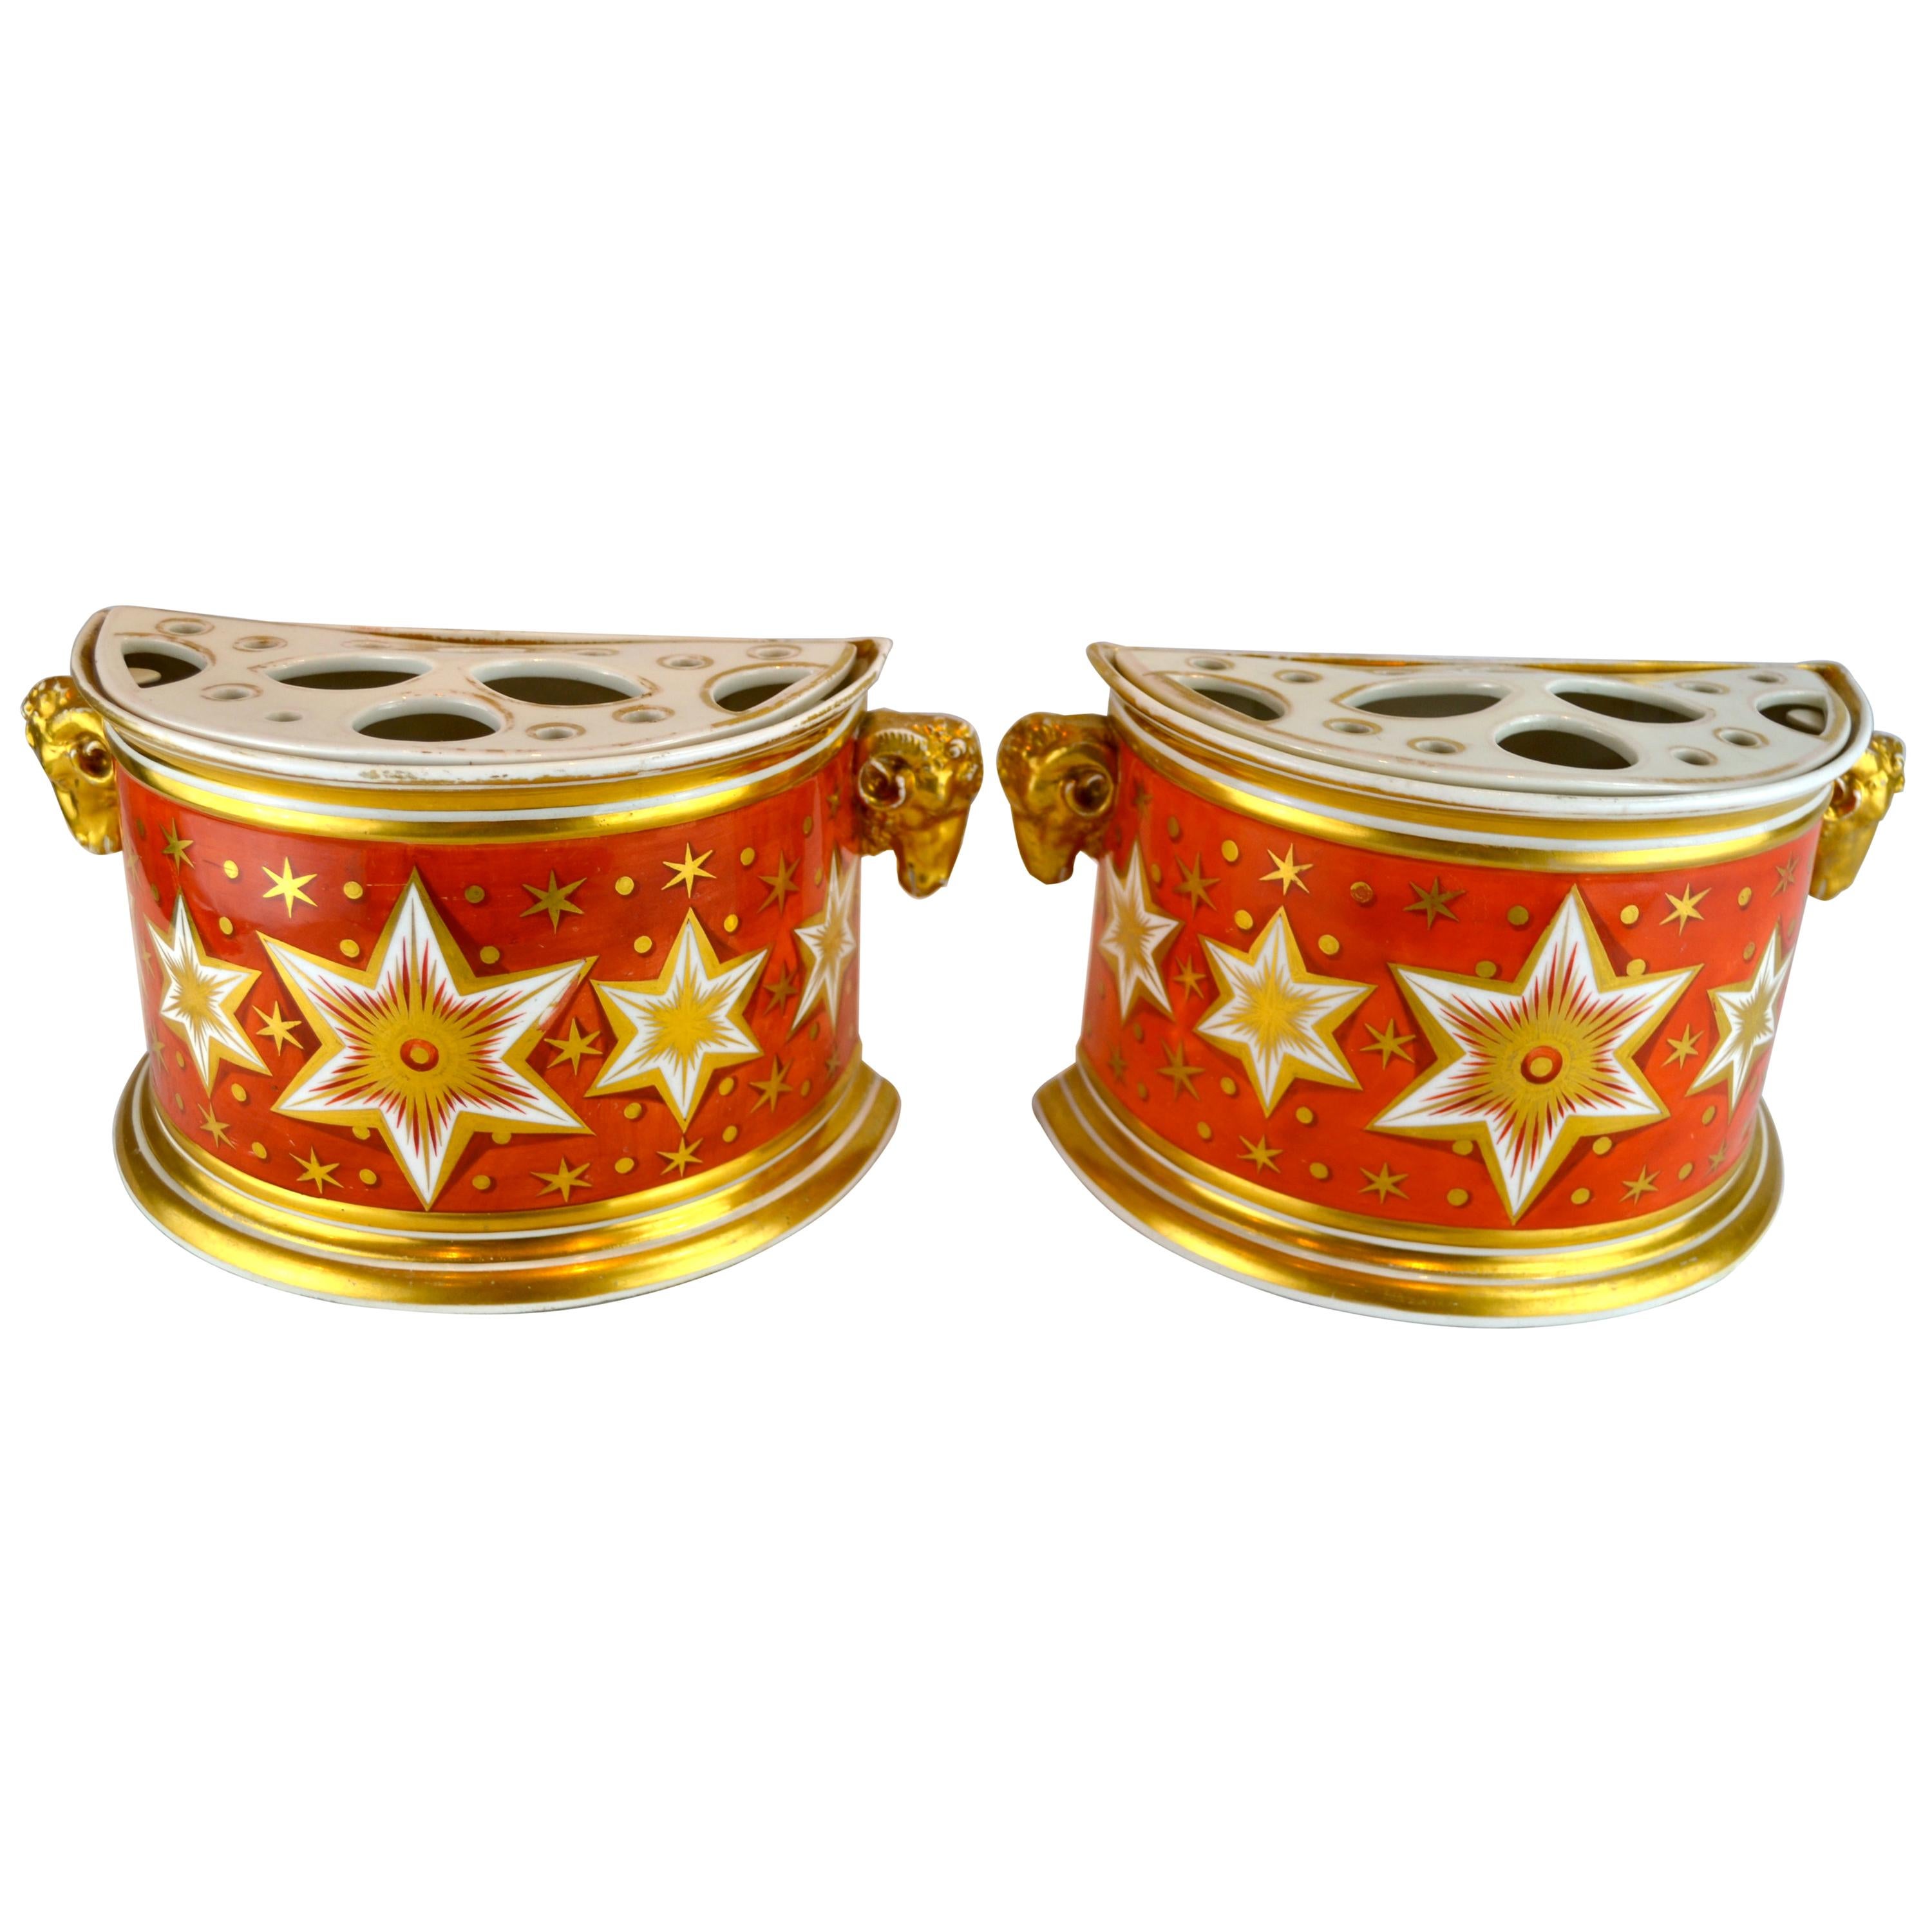 Pair of Early 19th Century English Worcester Orange Ground Gilded Star Bough Pot